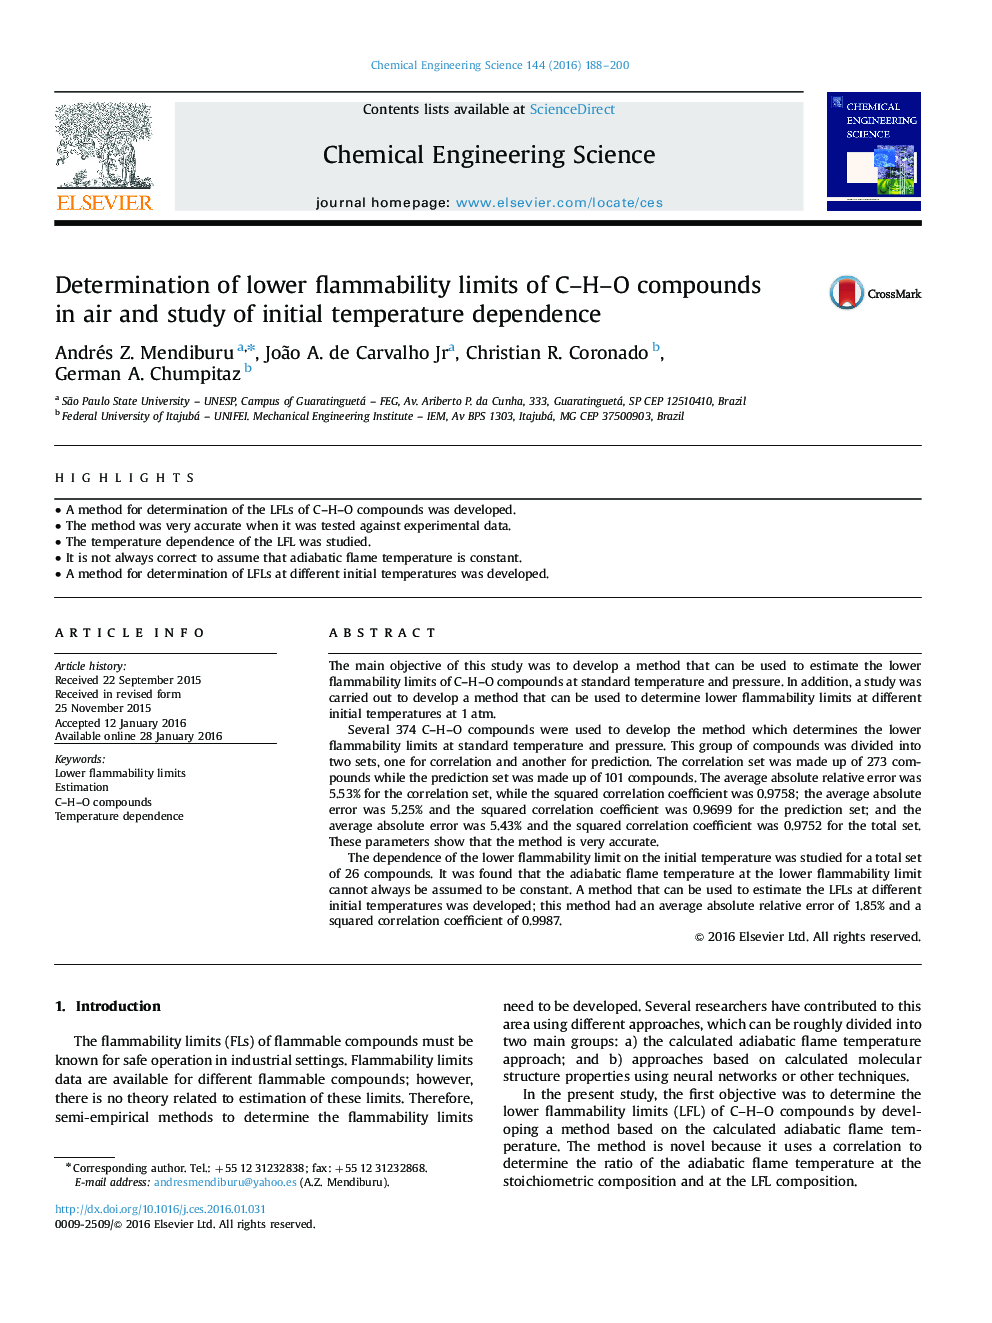 Determination of lower flammability limits of C-H-O compounds in air and study of initial temperature dependence